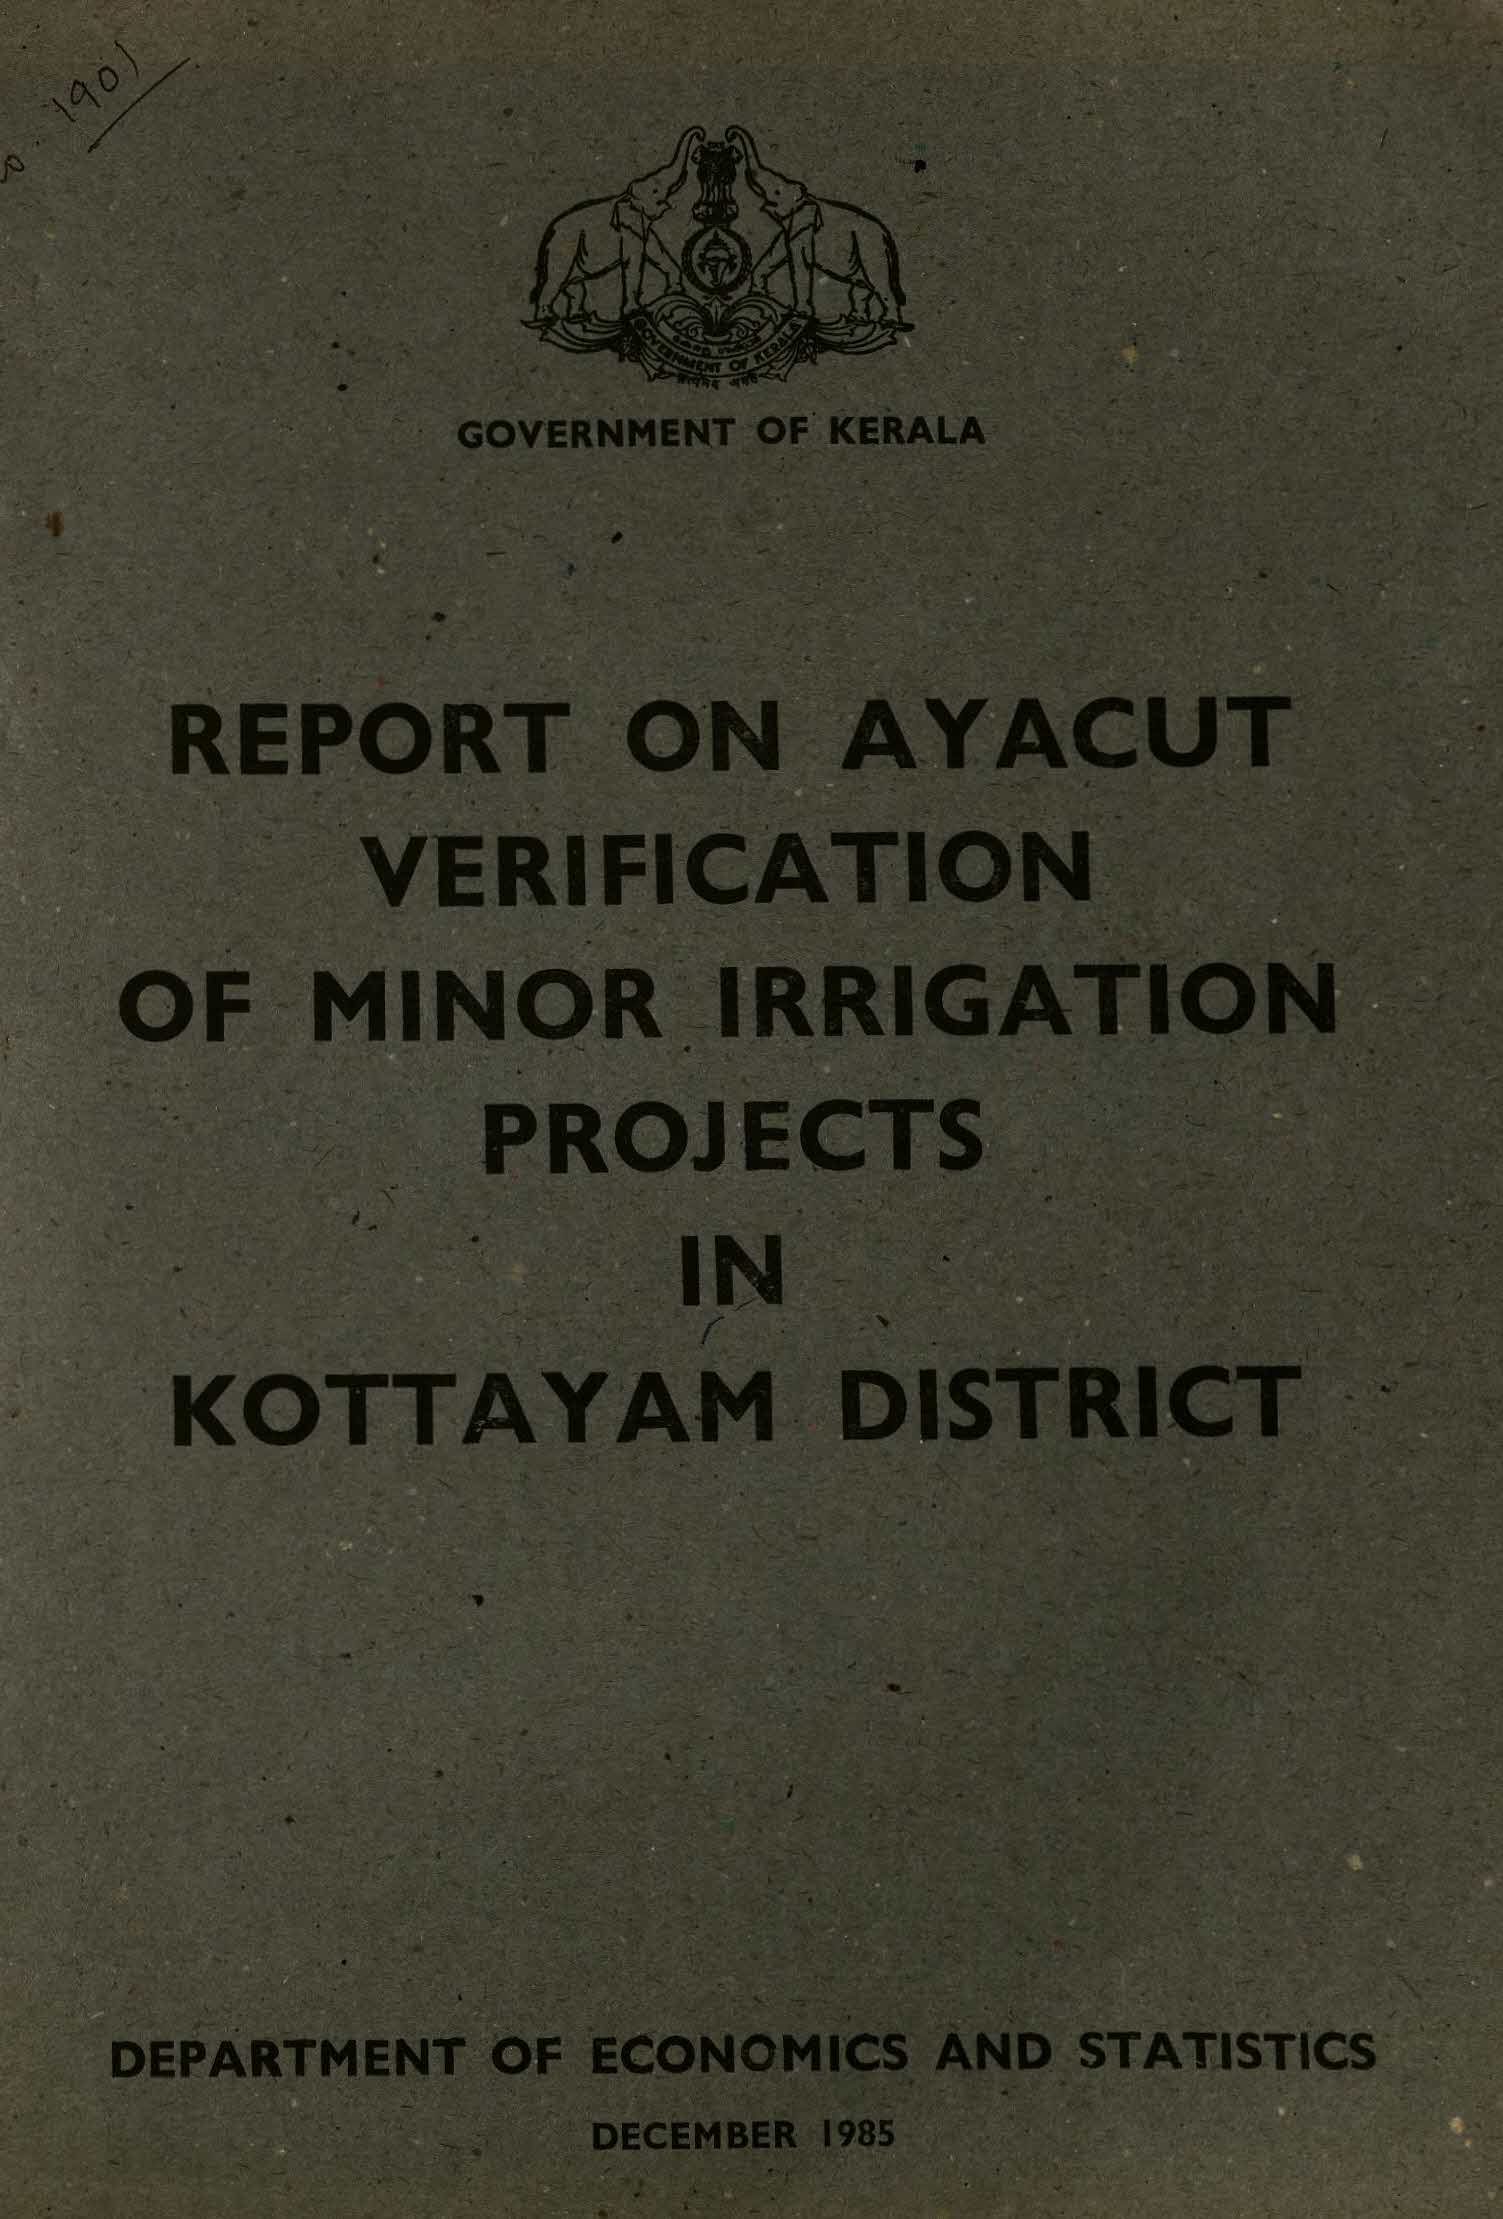 REPORT ON AYACUT VERIFICATION OF MINOR IRRIGATION PROJECTS IN KOTTAYAM DISTRICT